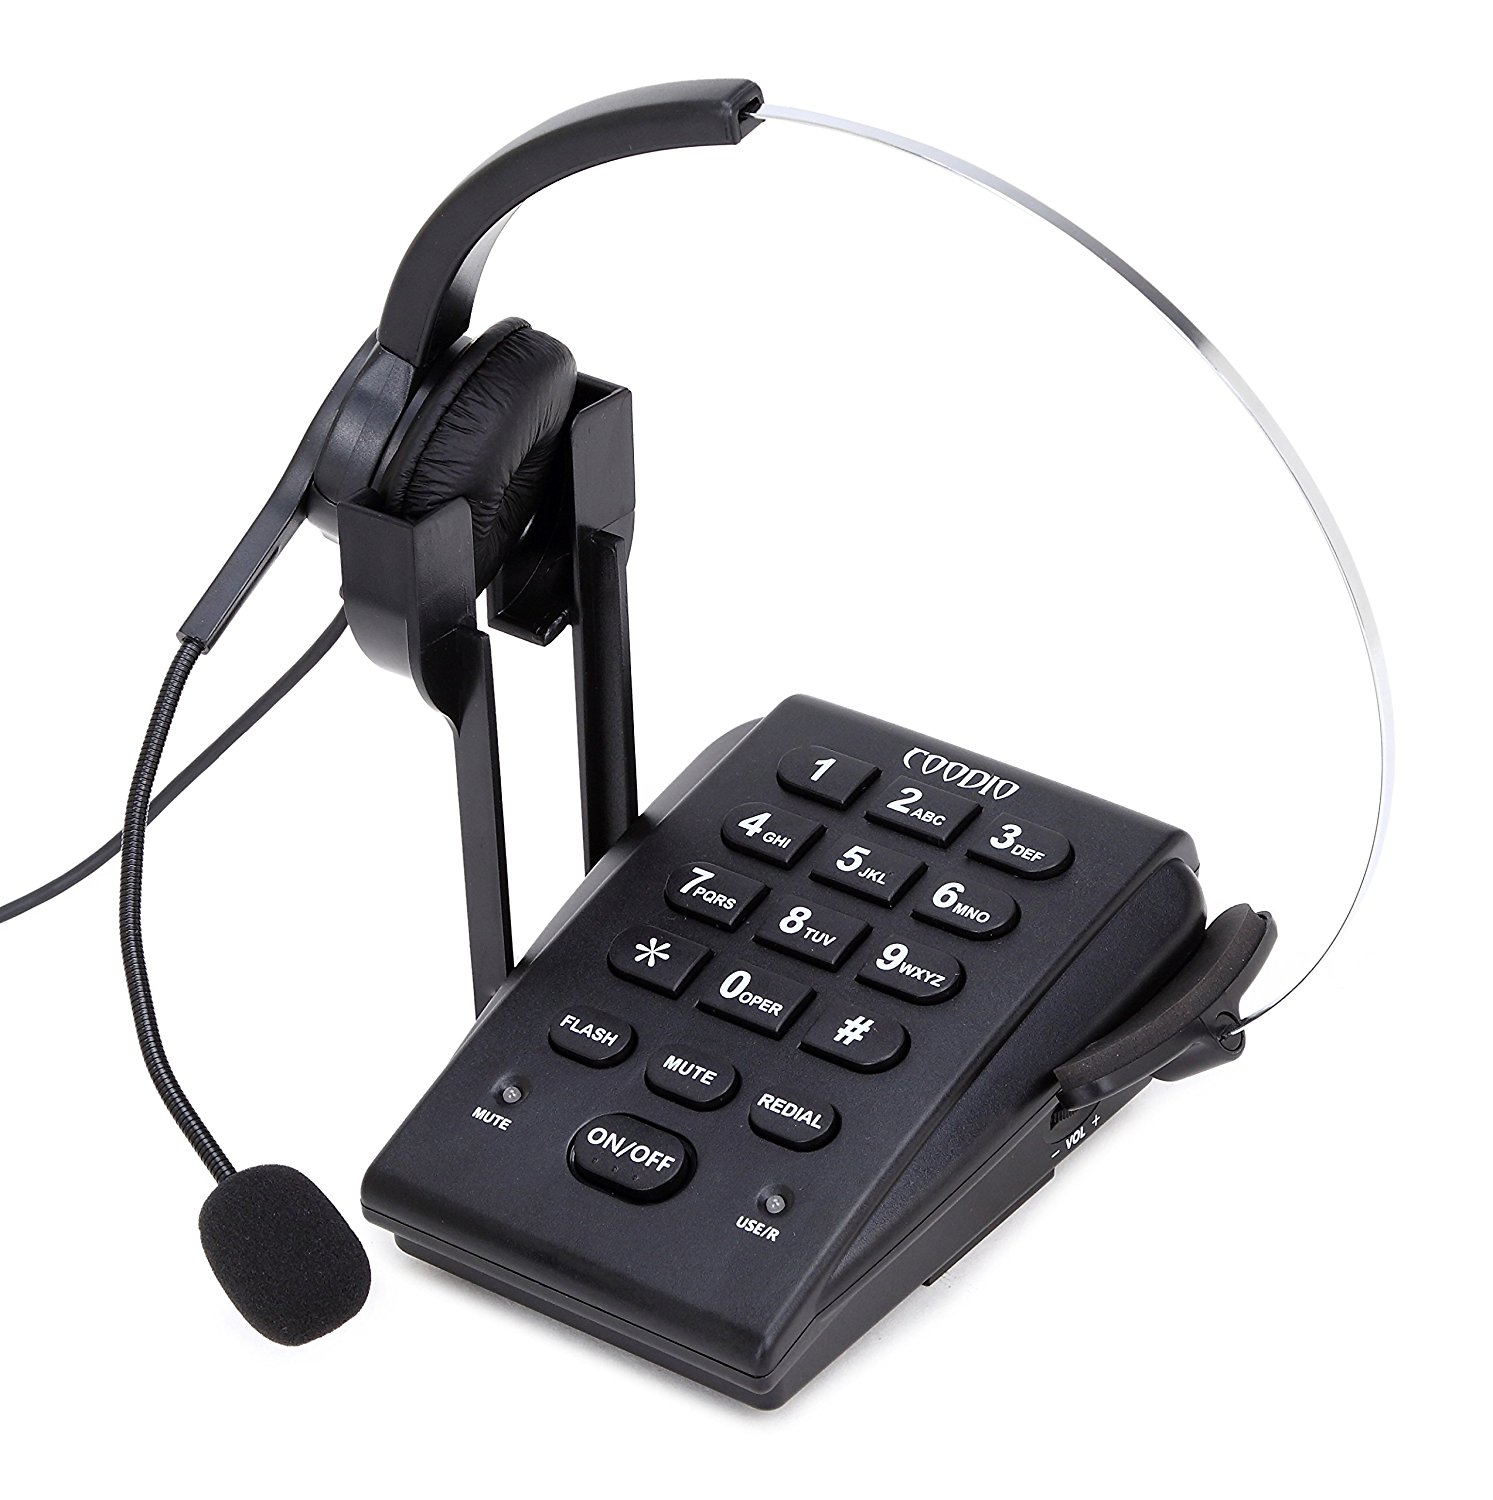 Amazon.com : Dialpad with Headset, Coodio Corded Phone [Call Center ...